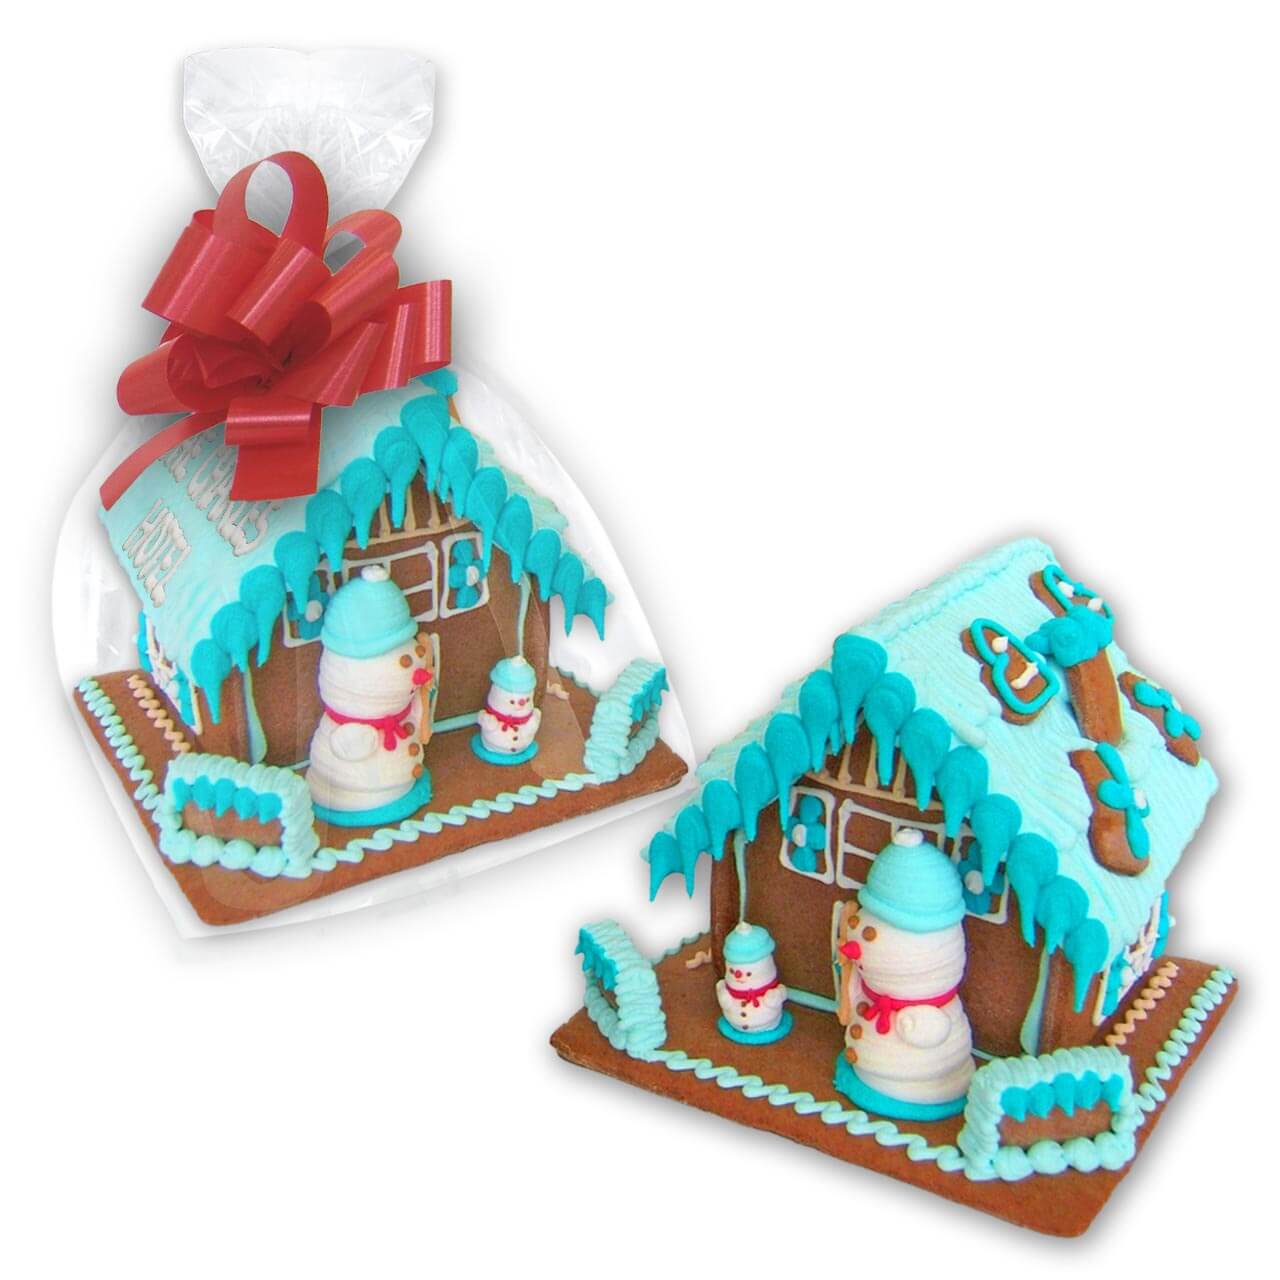 Individual gingerbread house - large